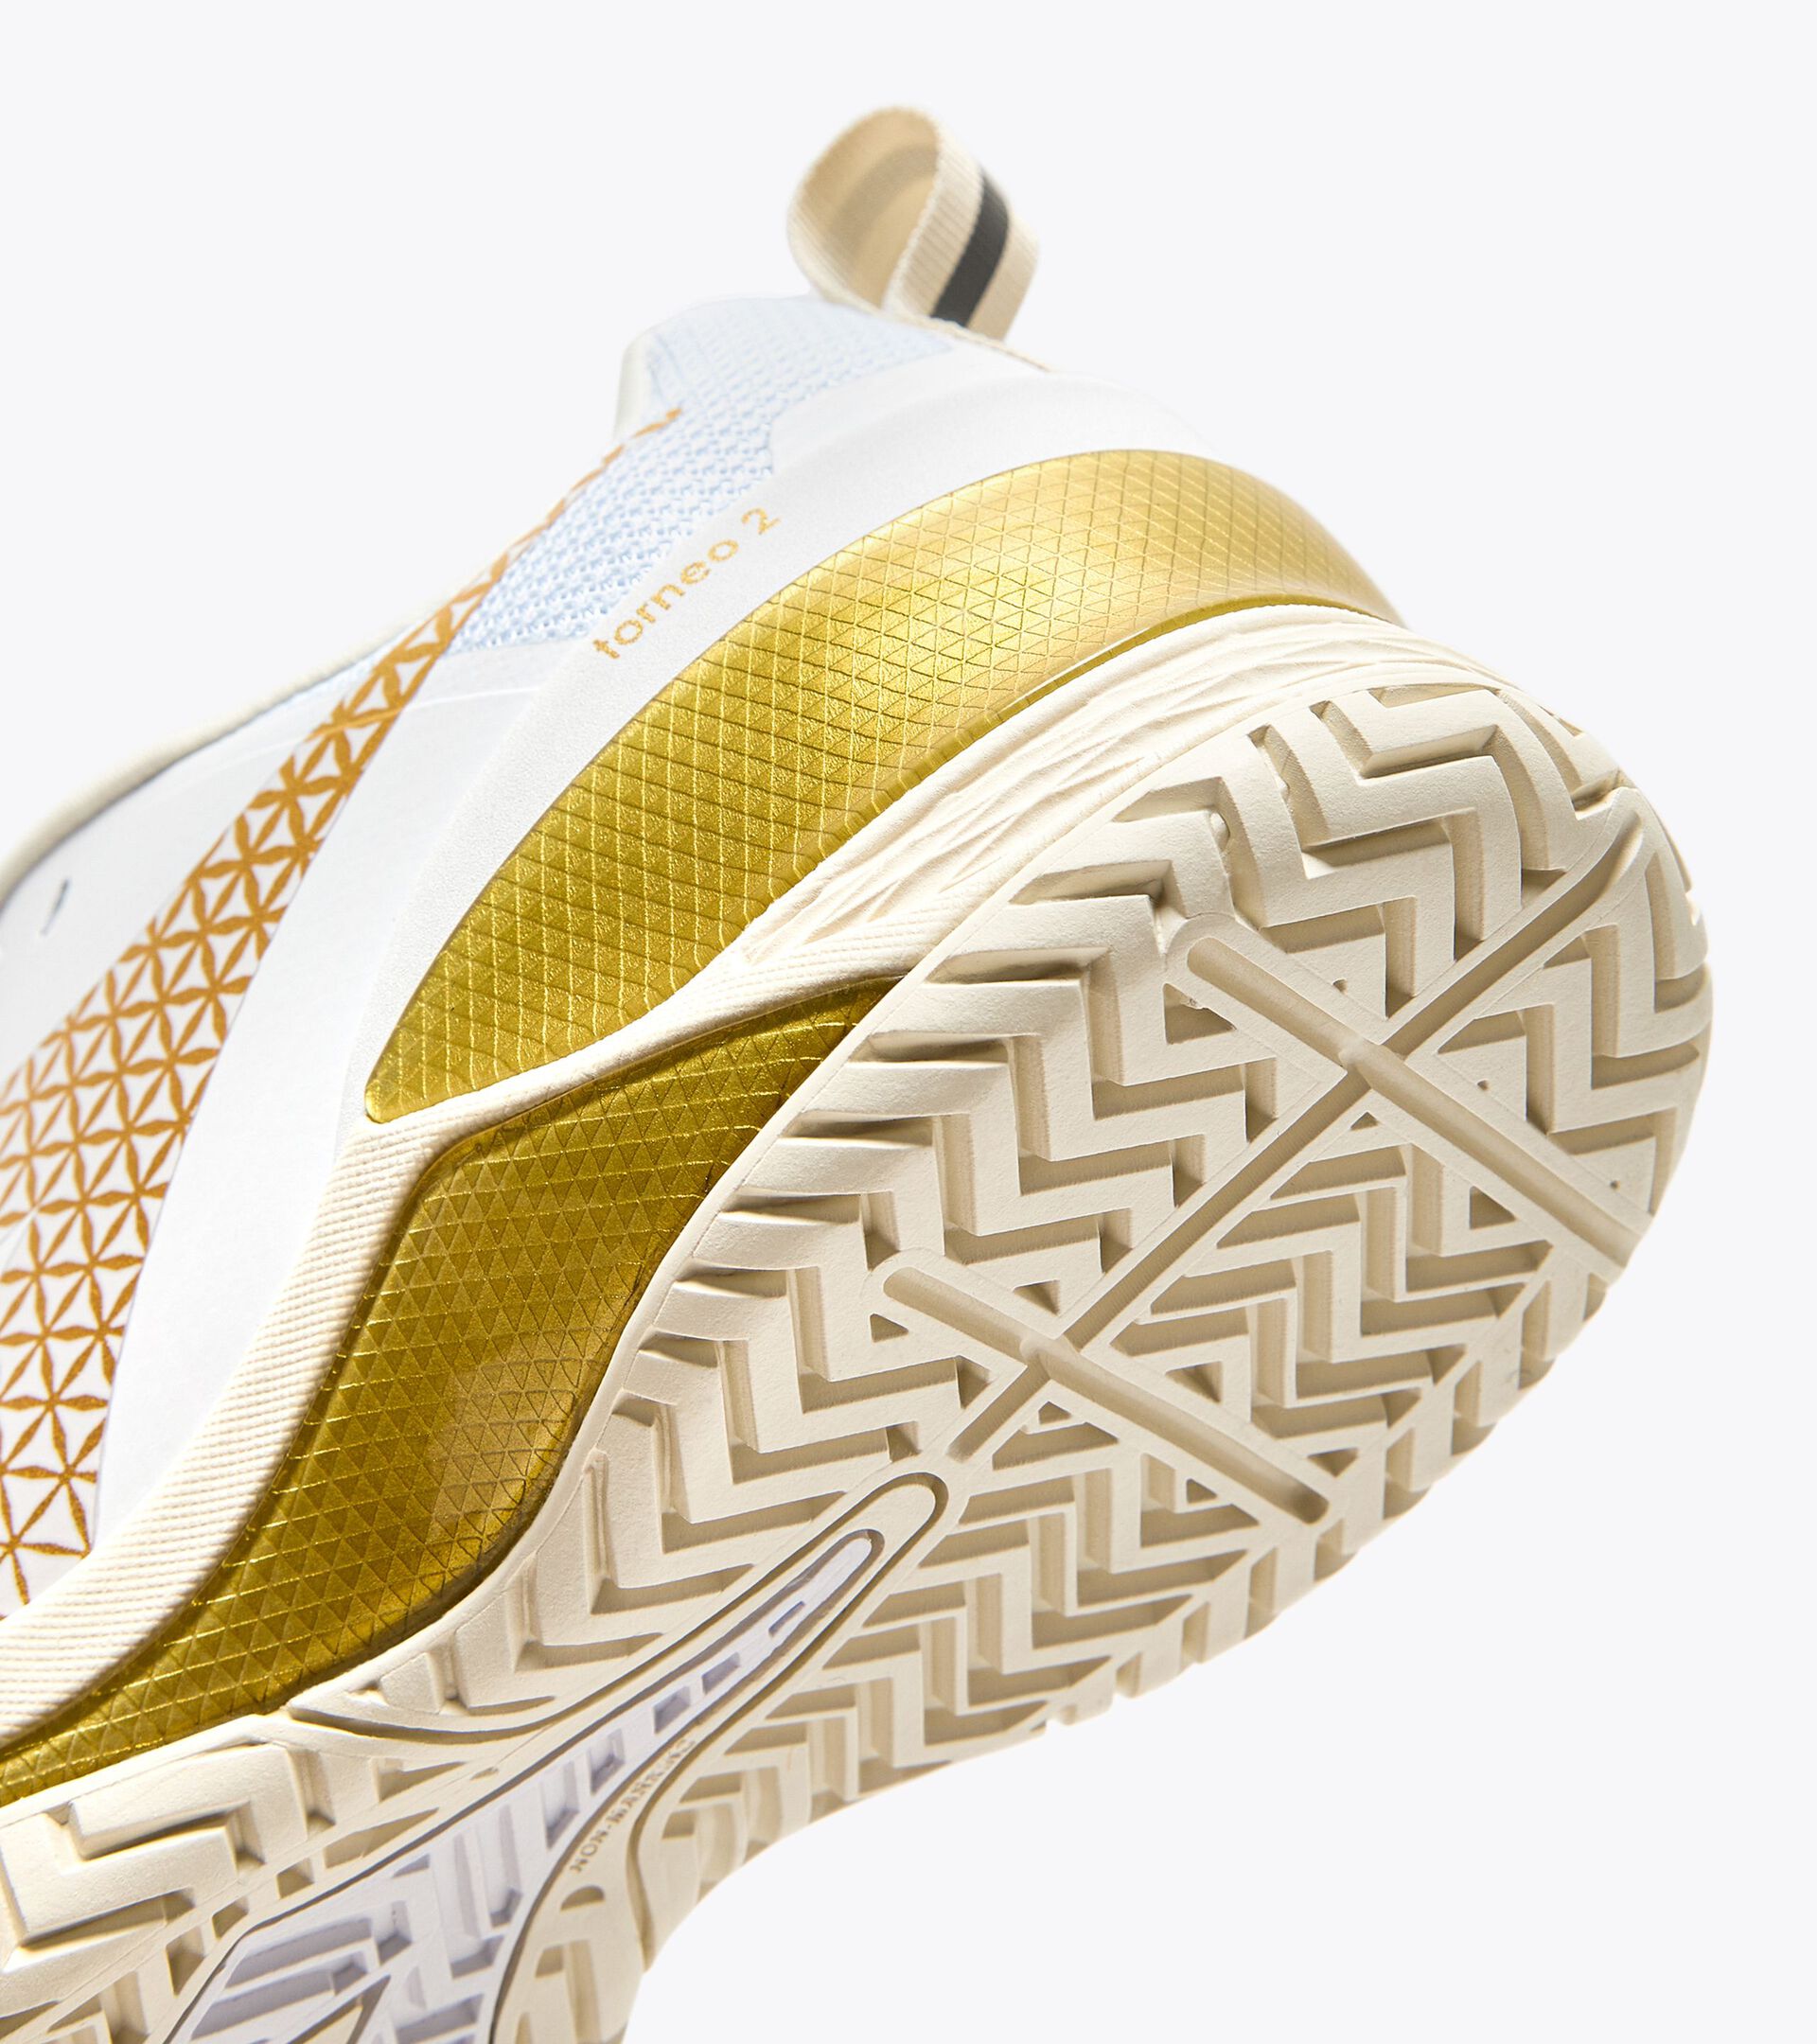 Tennis shoes for hard surfaces or clay courts - Women BLUSHIELD TORNEO 2 W AG WHITE/GOLD - Diadora